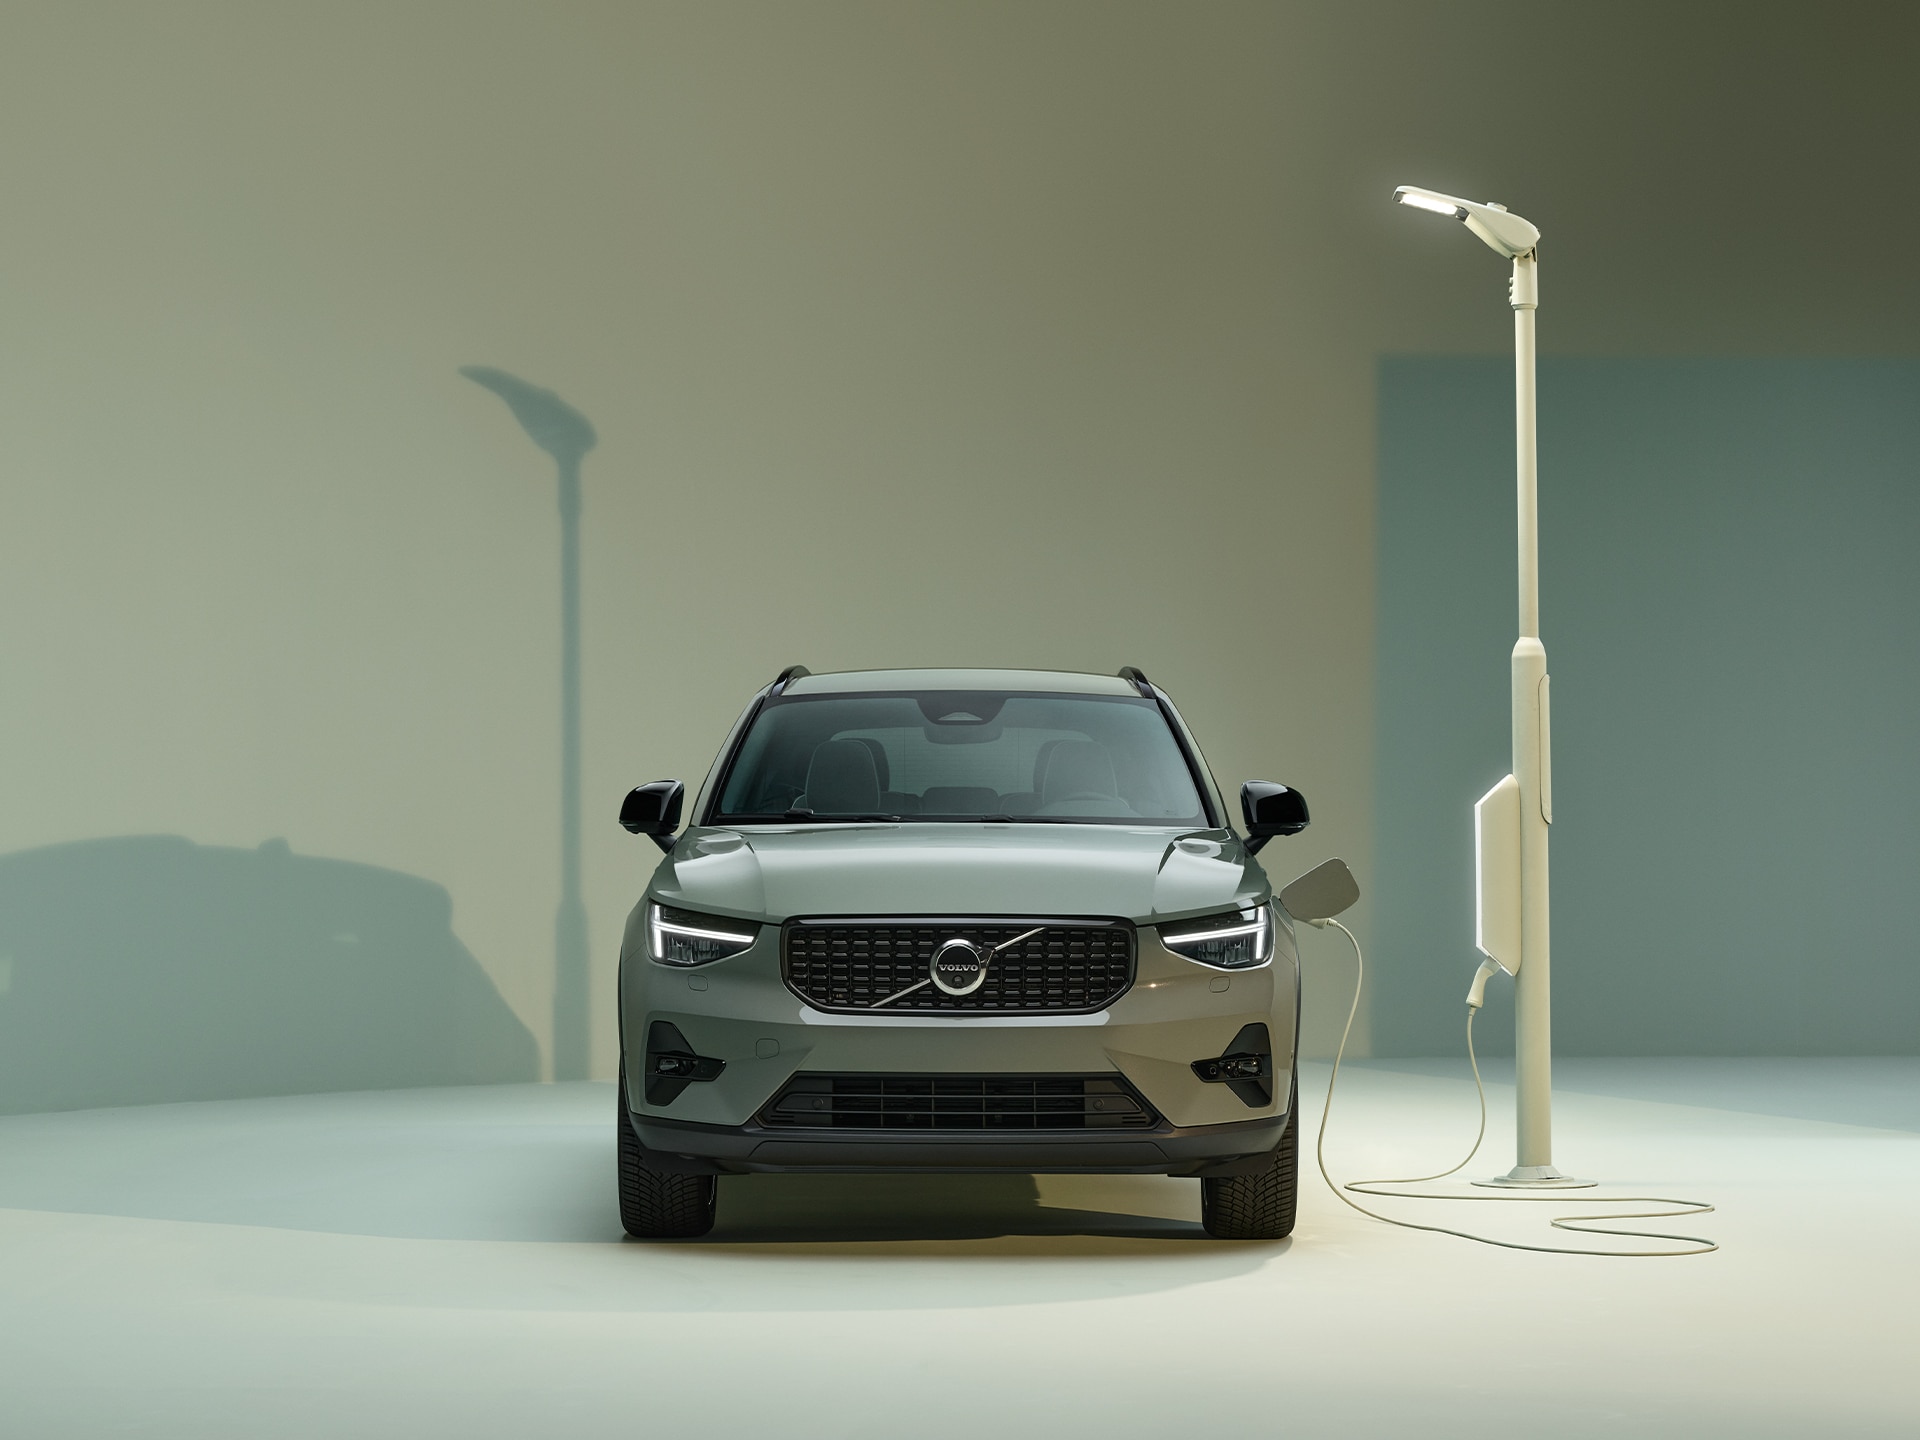 Refreshed exterior design details on the Volvo XC40 Recharge plug-in hybrid.